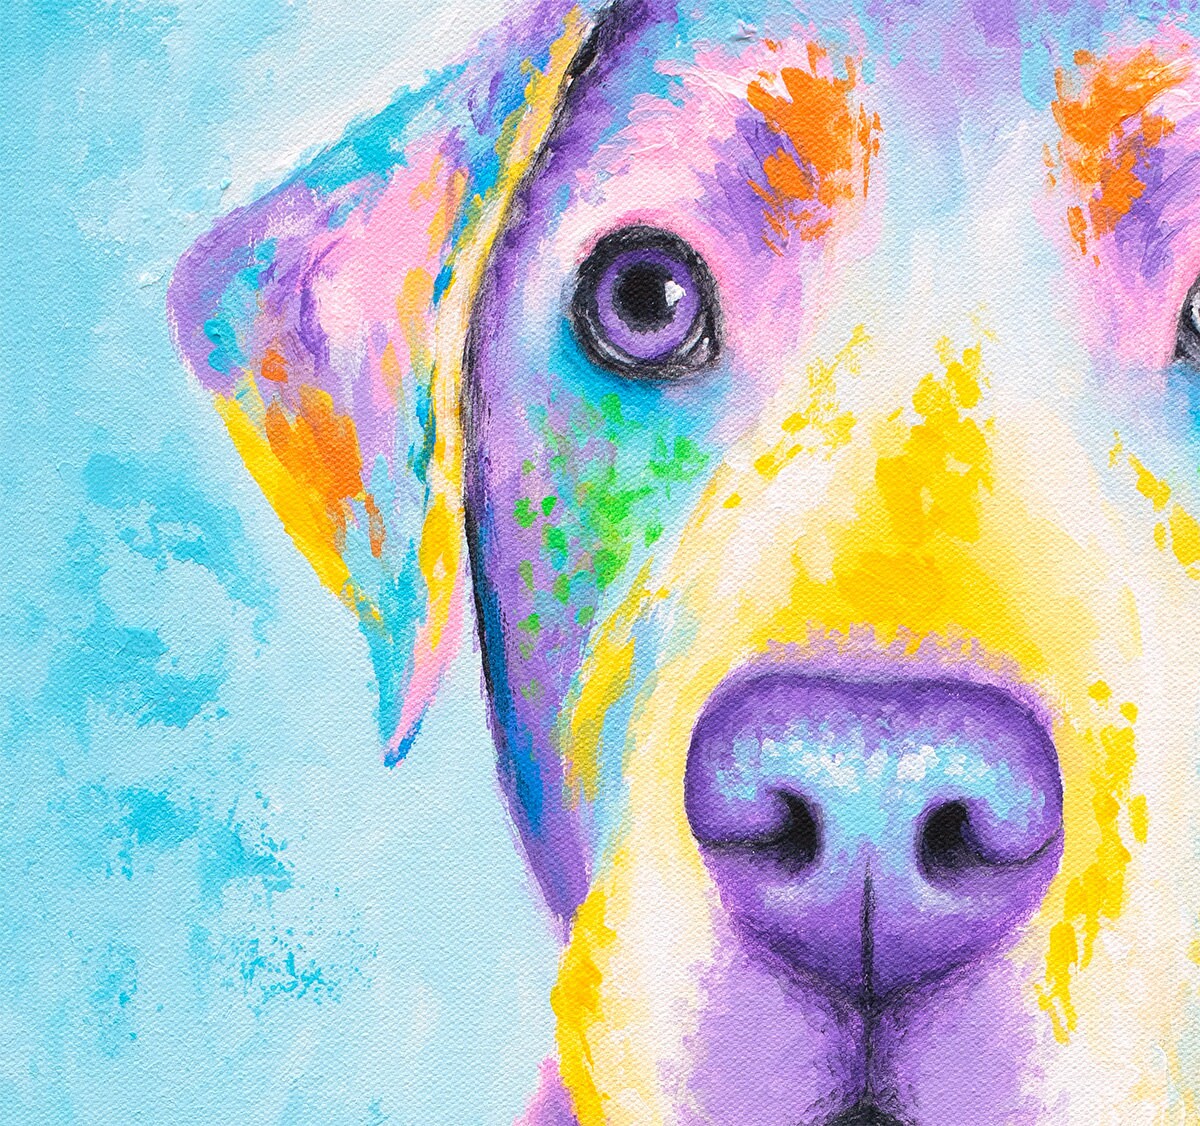 Labrador Retriever Art Print - Lab Dog Artwork on CANVAS or PAPER. Dog Lover Gift. Painting "Tika" by Krystle Cole